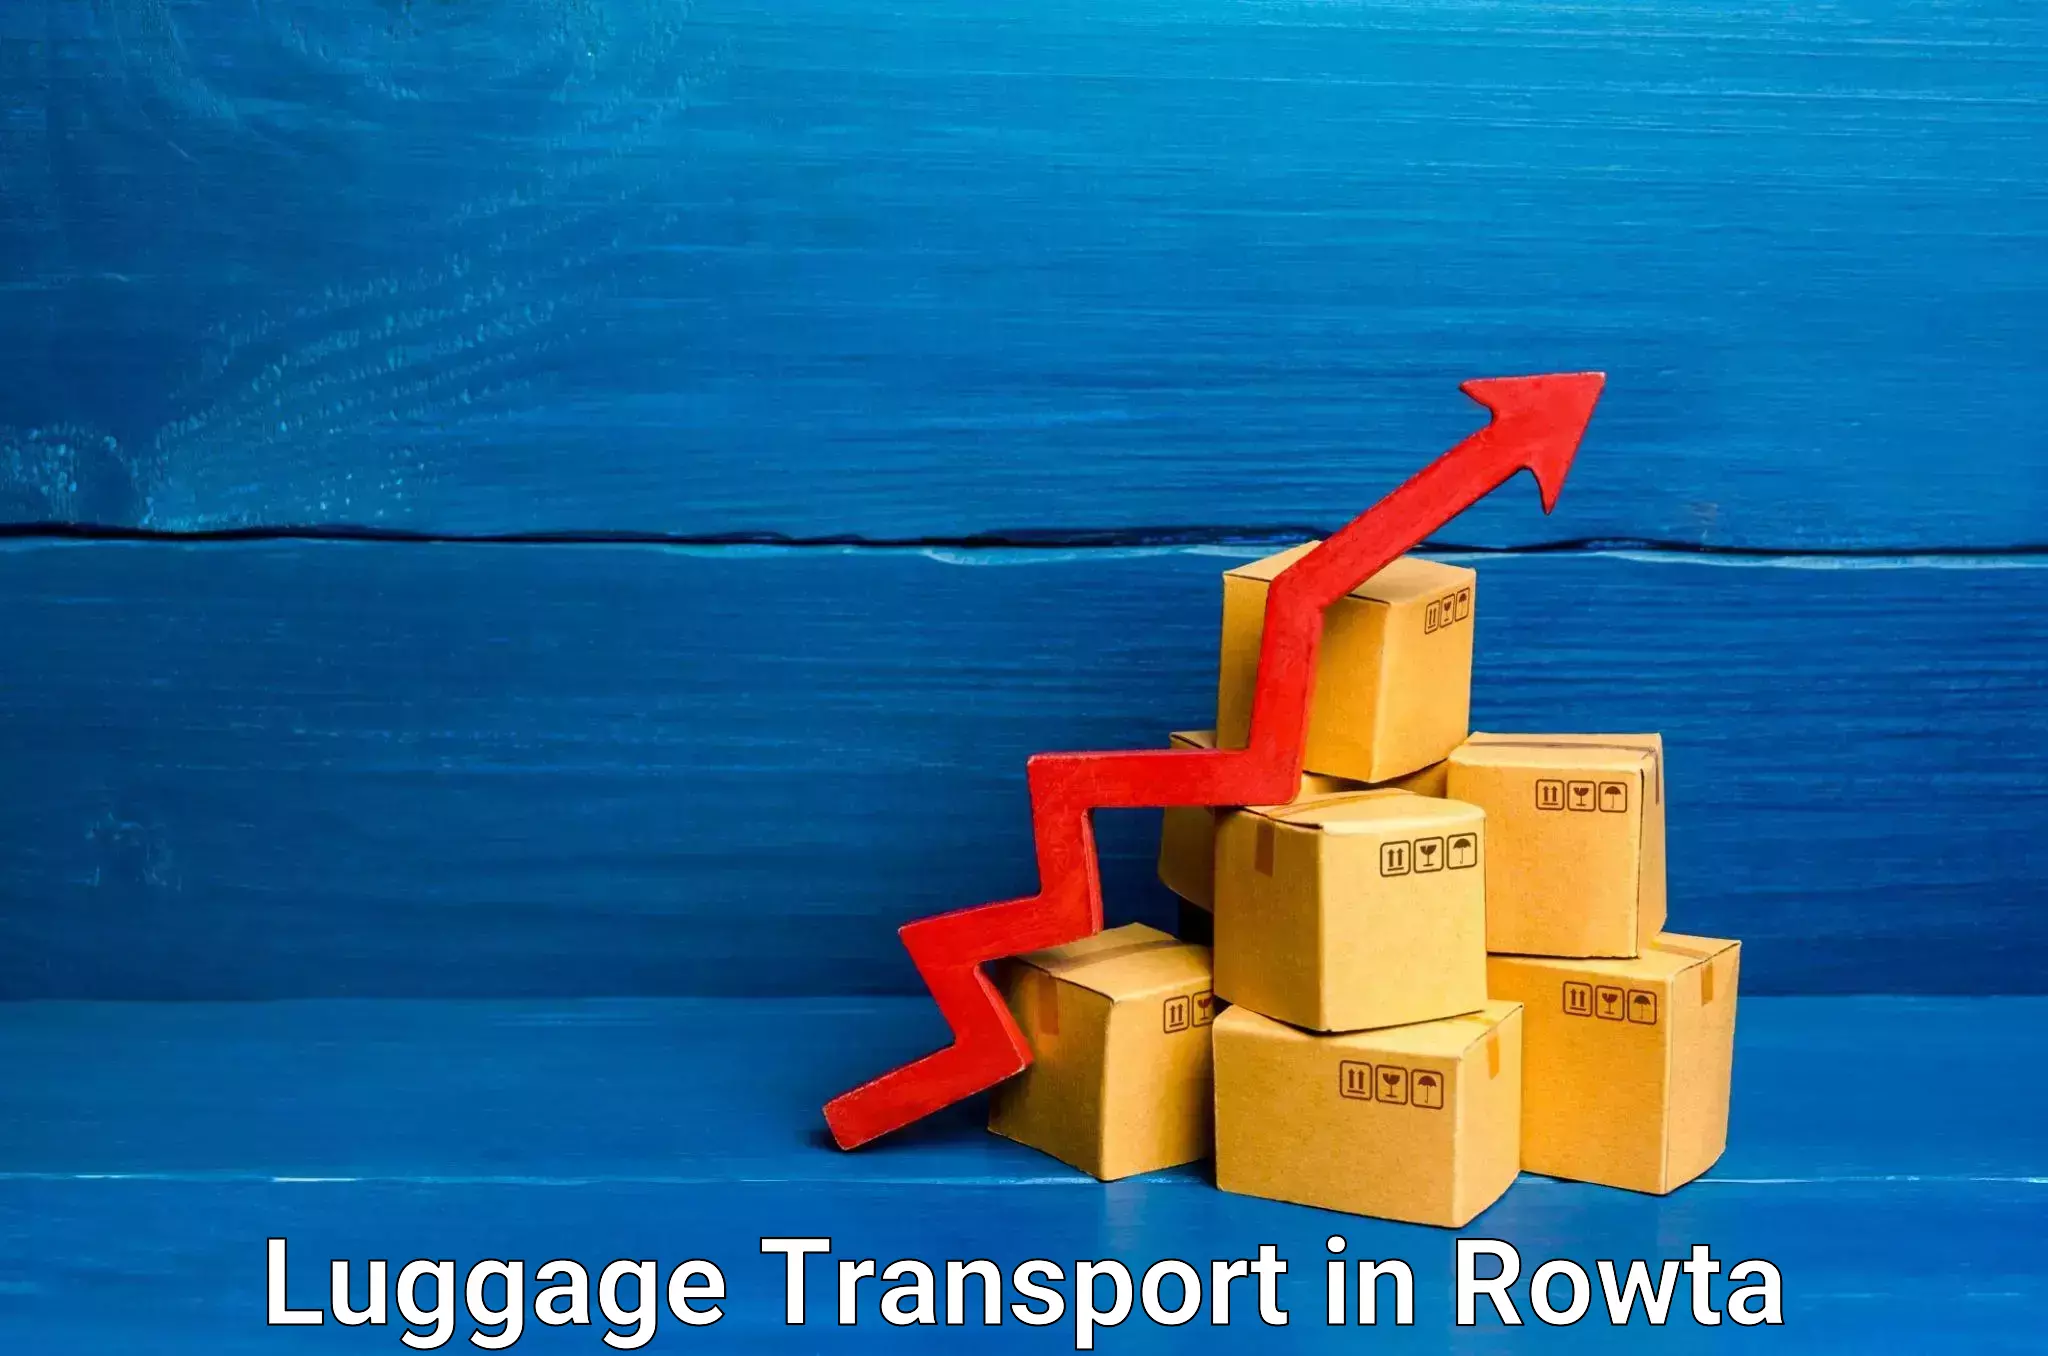 Automated luggage transport in Rowta